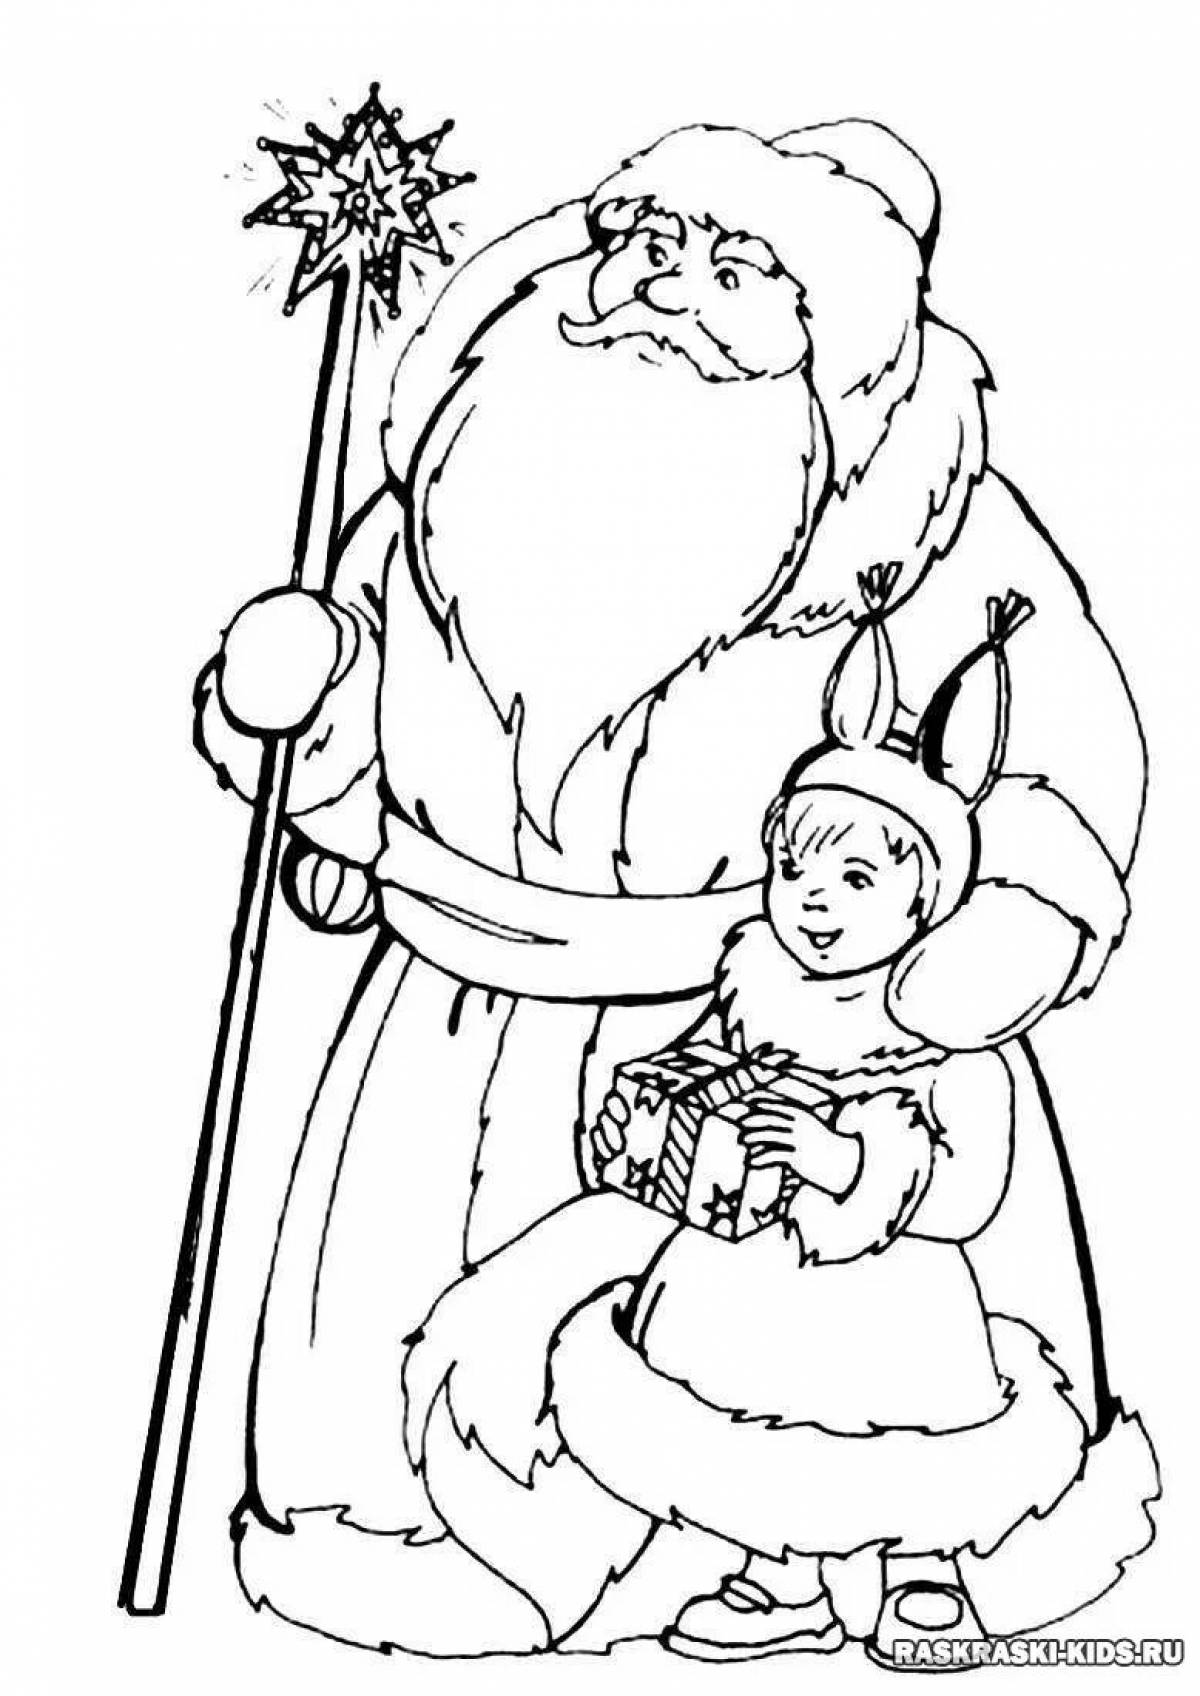 Coloring book funny Santa Claus and Snow Maiden